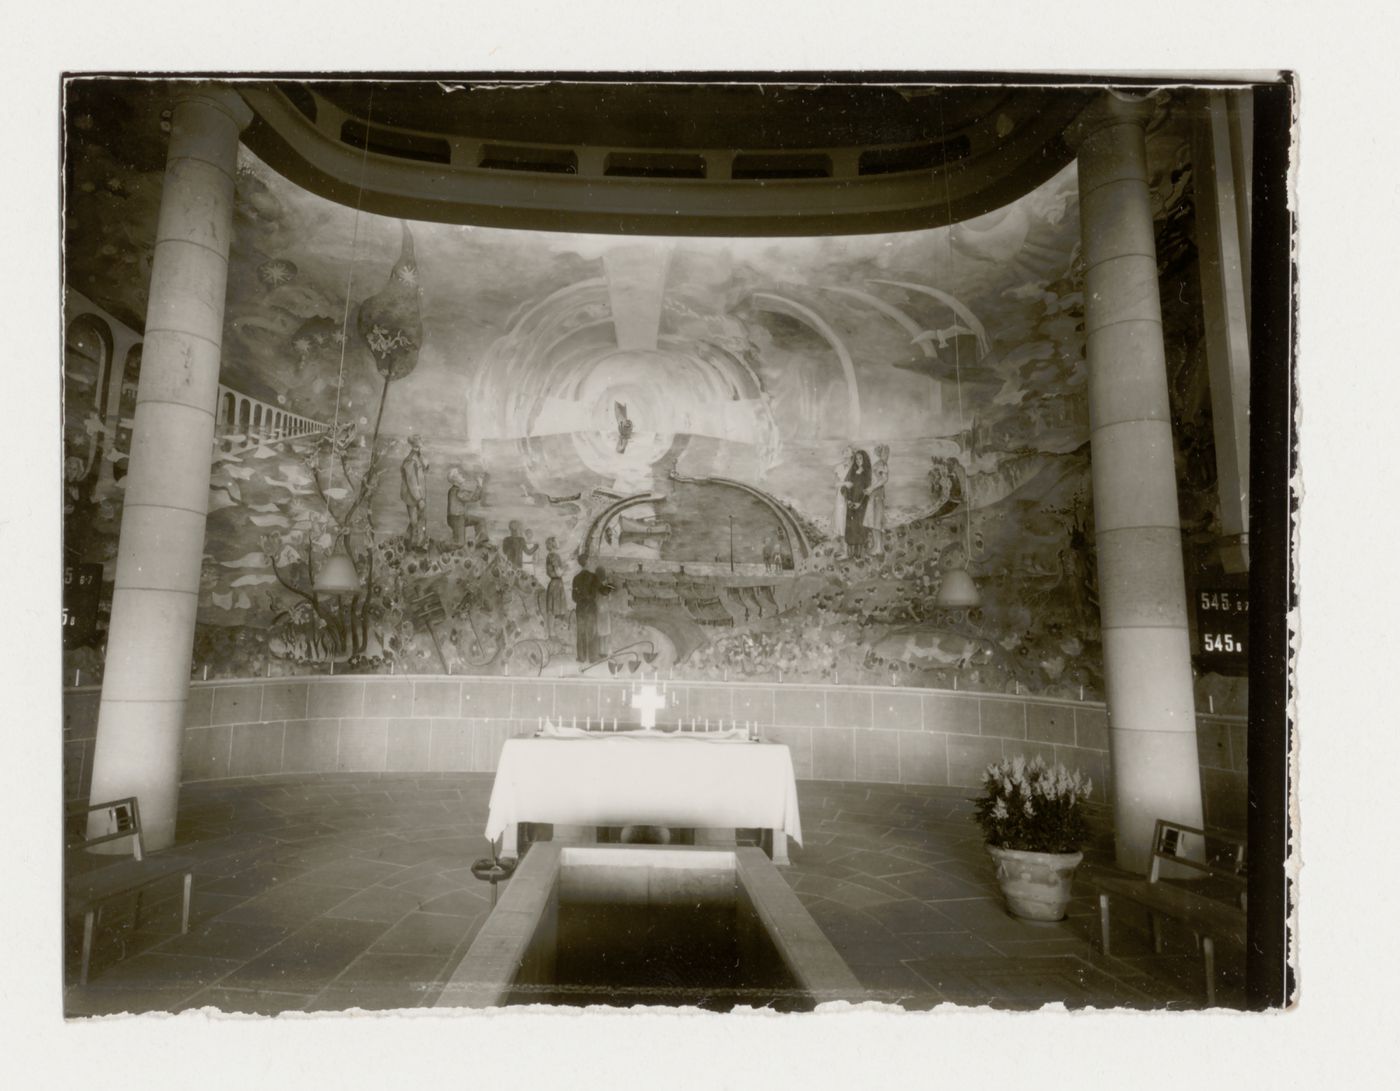 Interior view of the Chapel of the Holy Cross showing the altar and the fresco designed by Sven Erixson, Woodland Crematorium and Cemetery, Stockholm